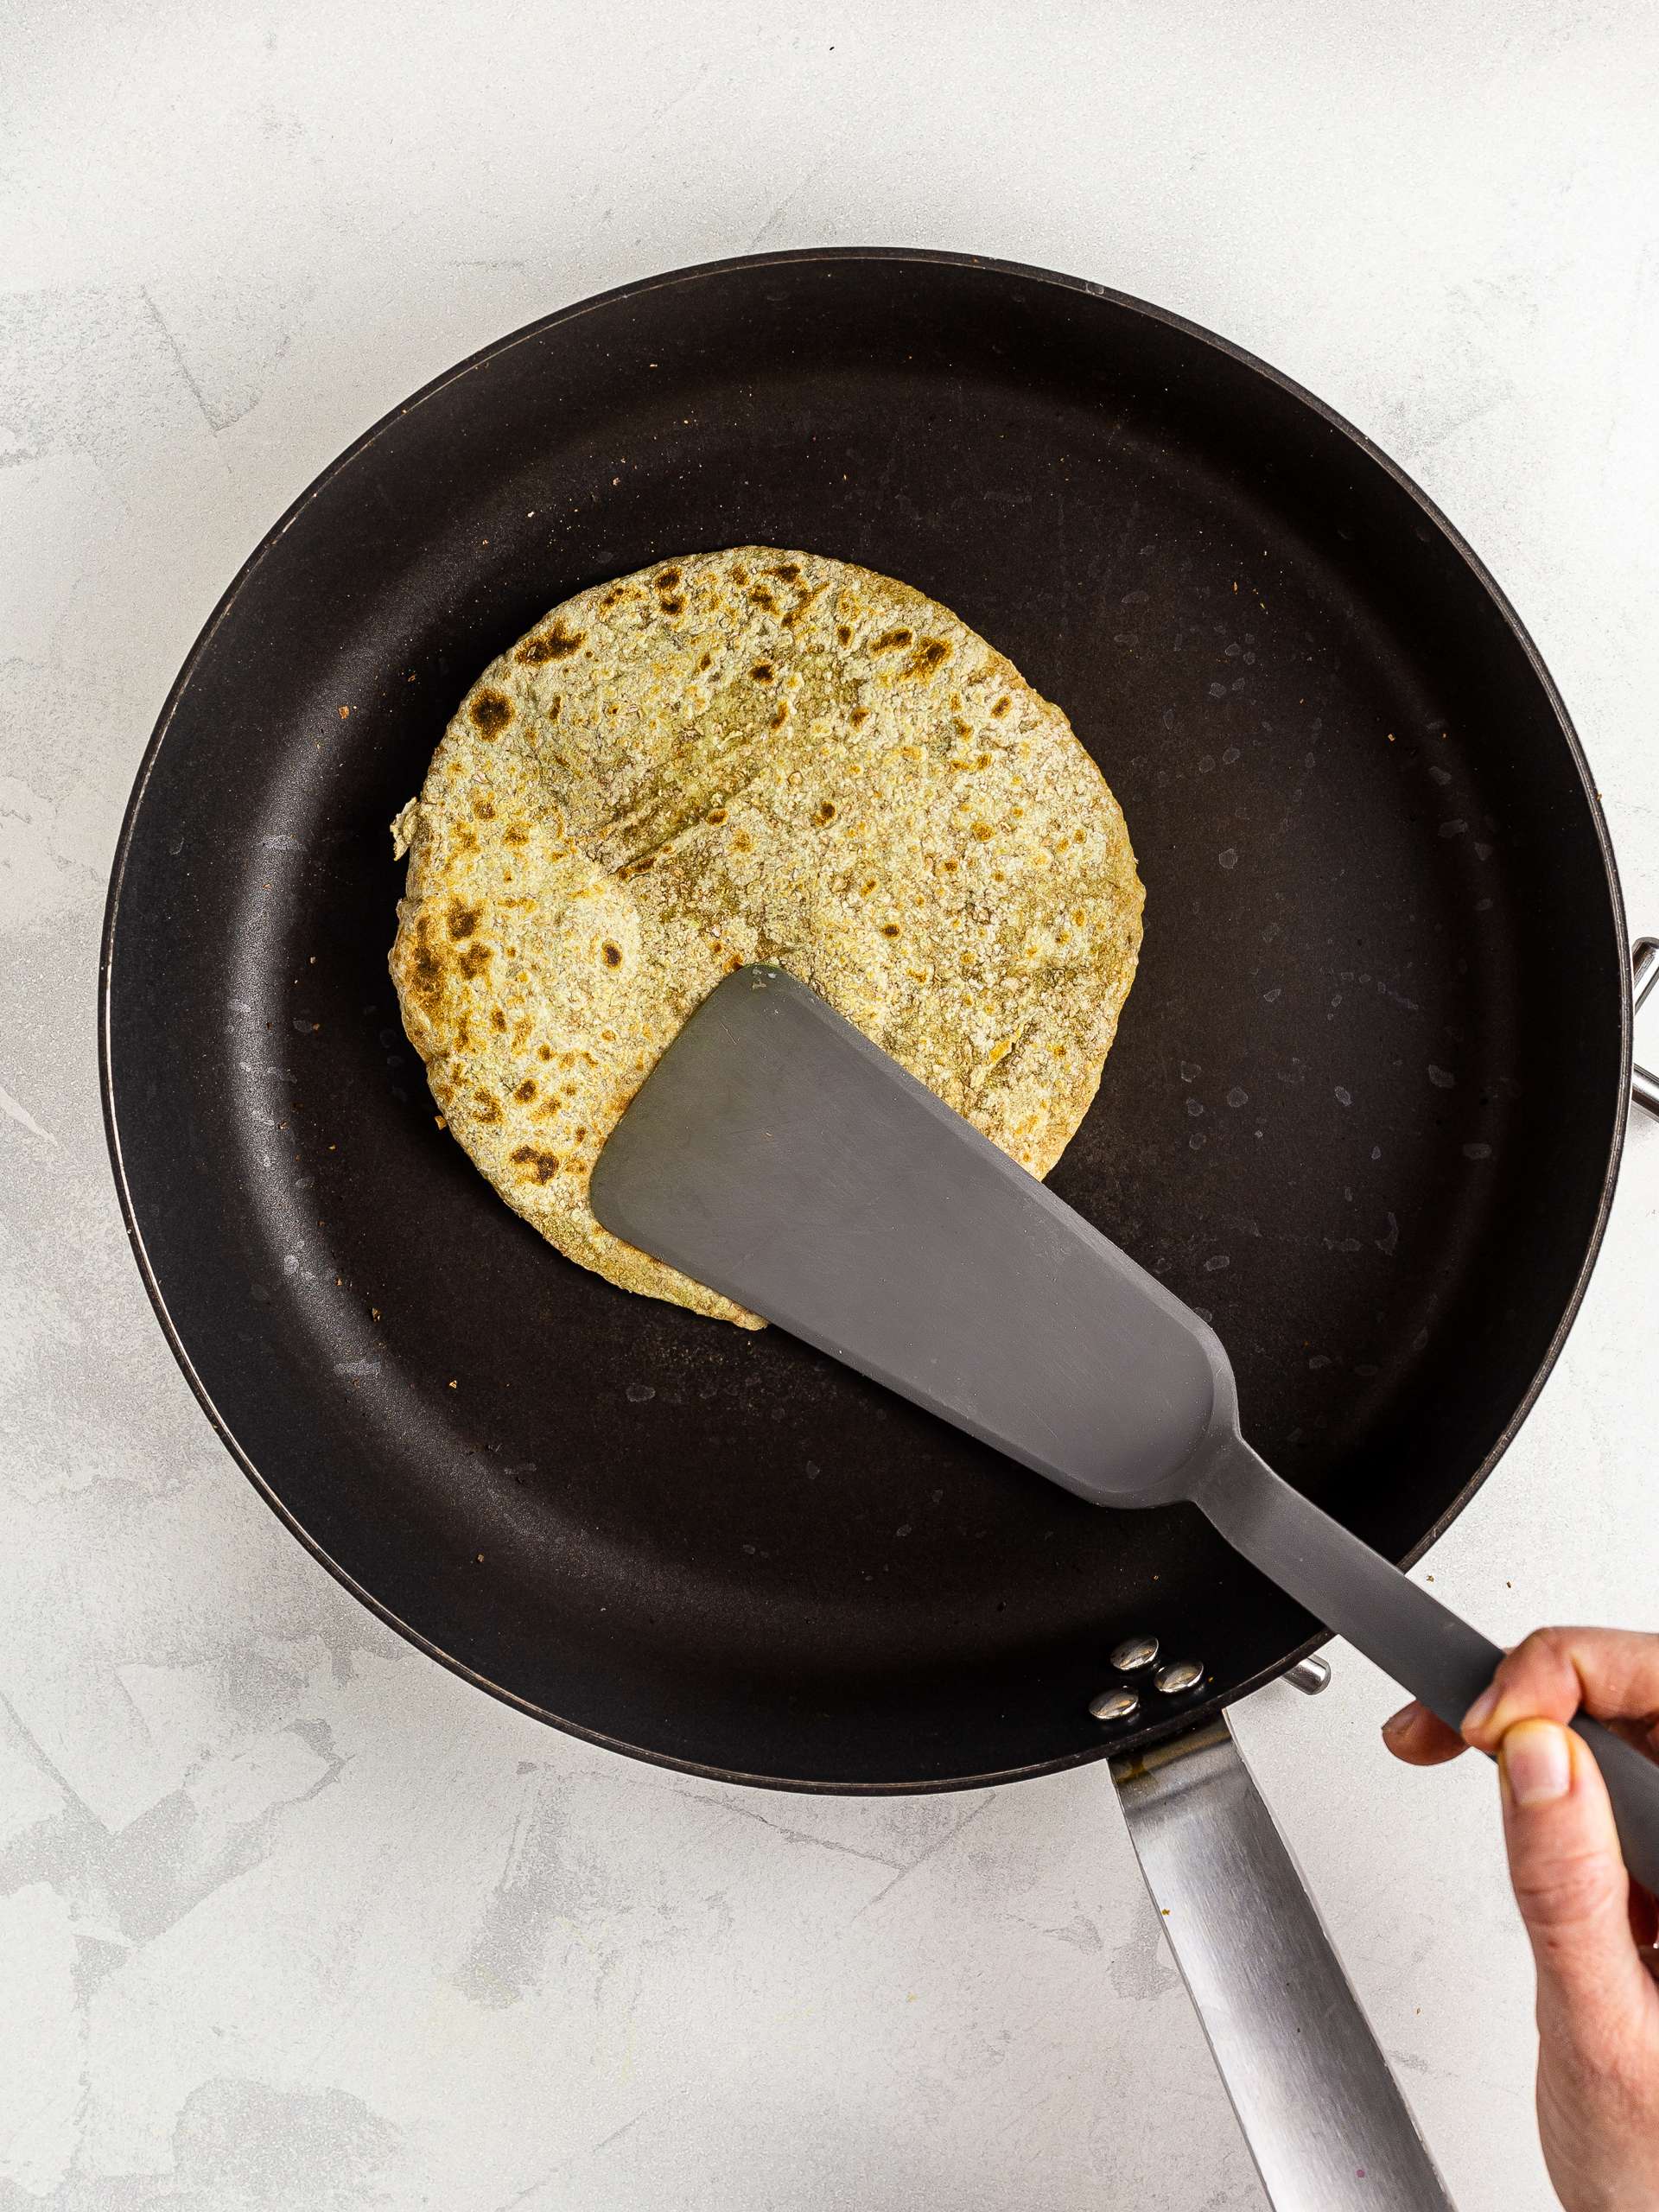 cooking avocado chapati in a skillet